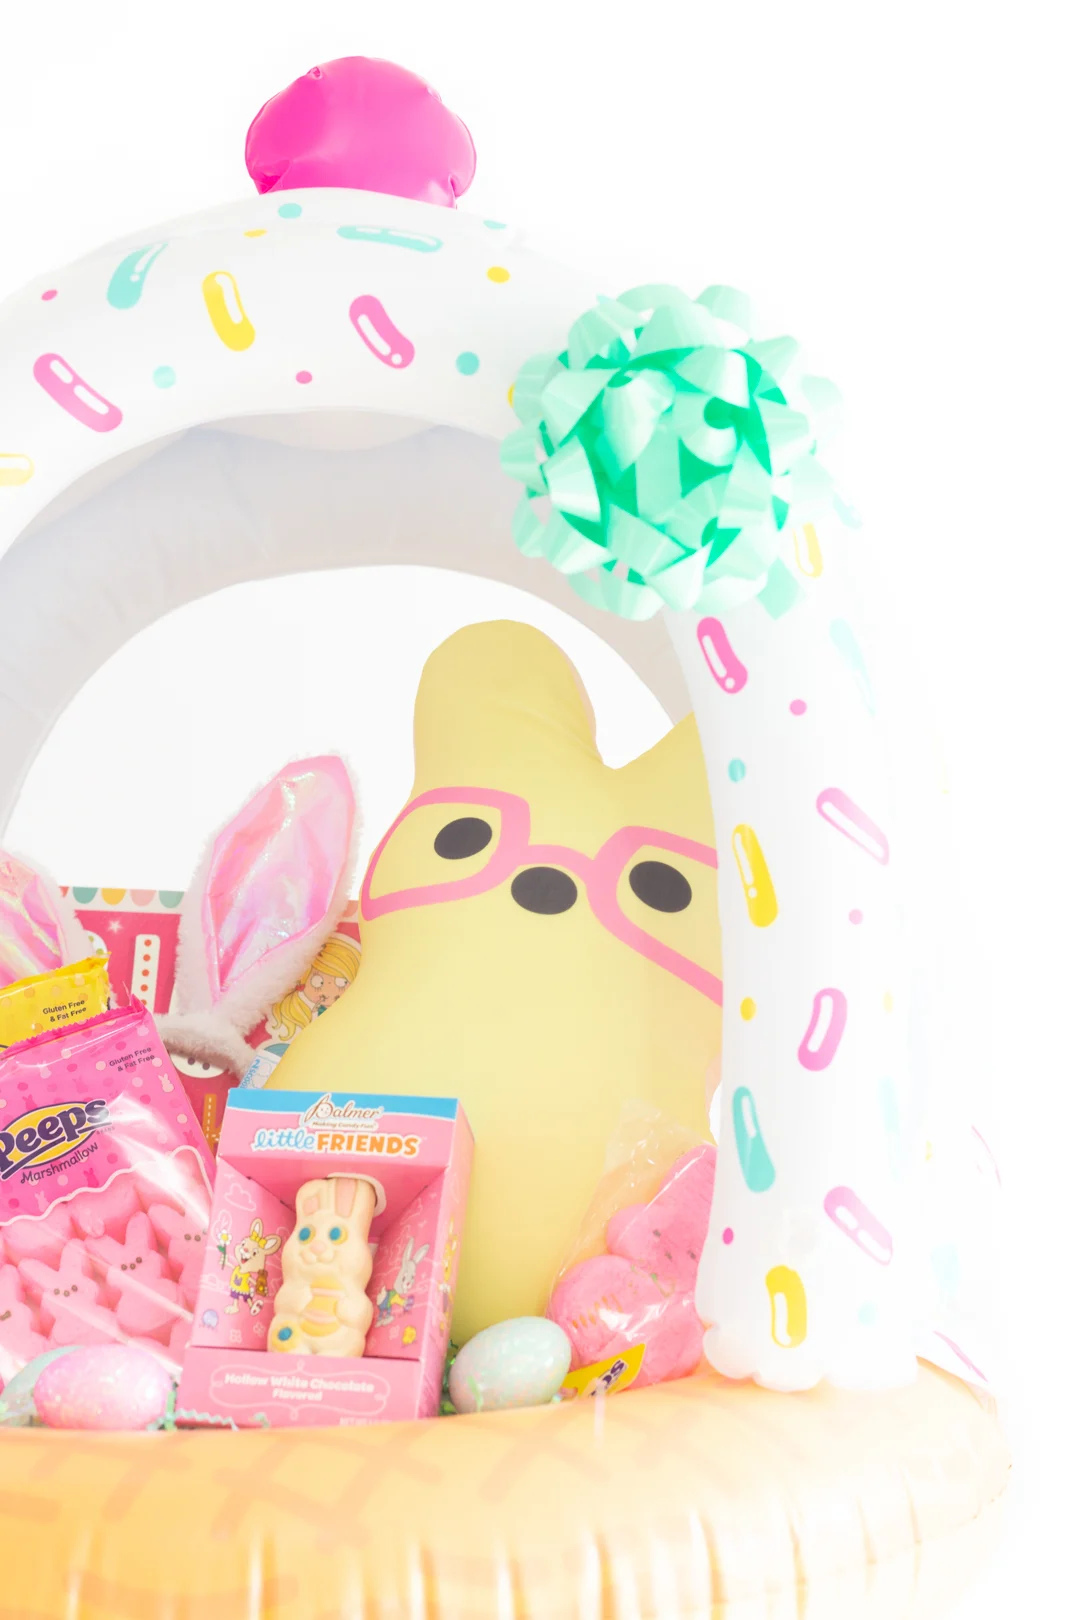 cute easter basket for kids. Pastel themed, yellow, pink and teal.